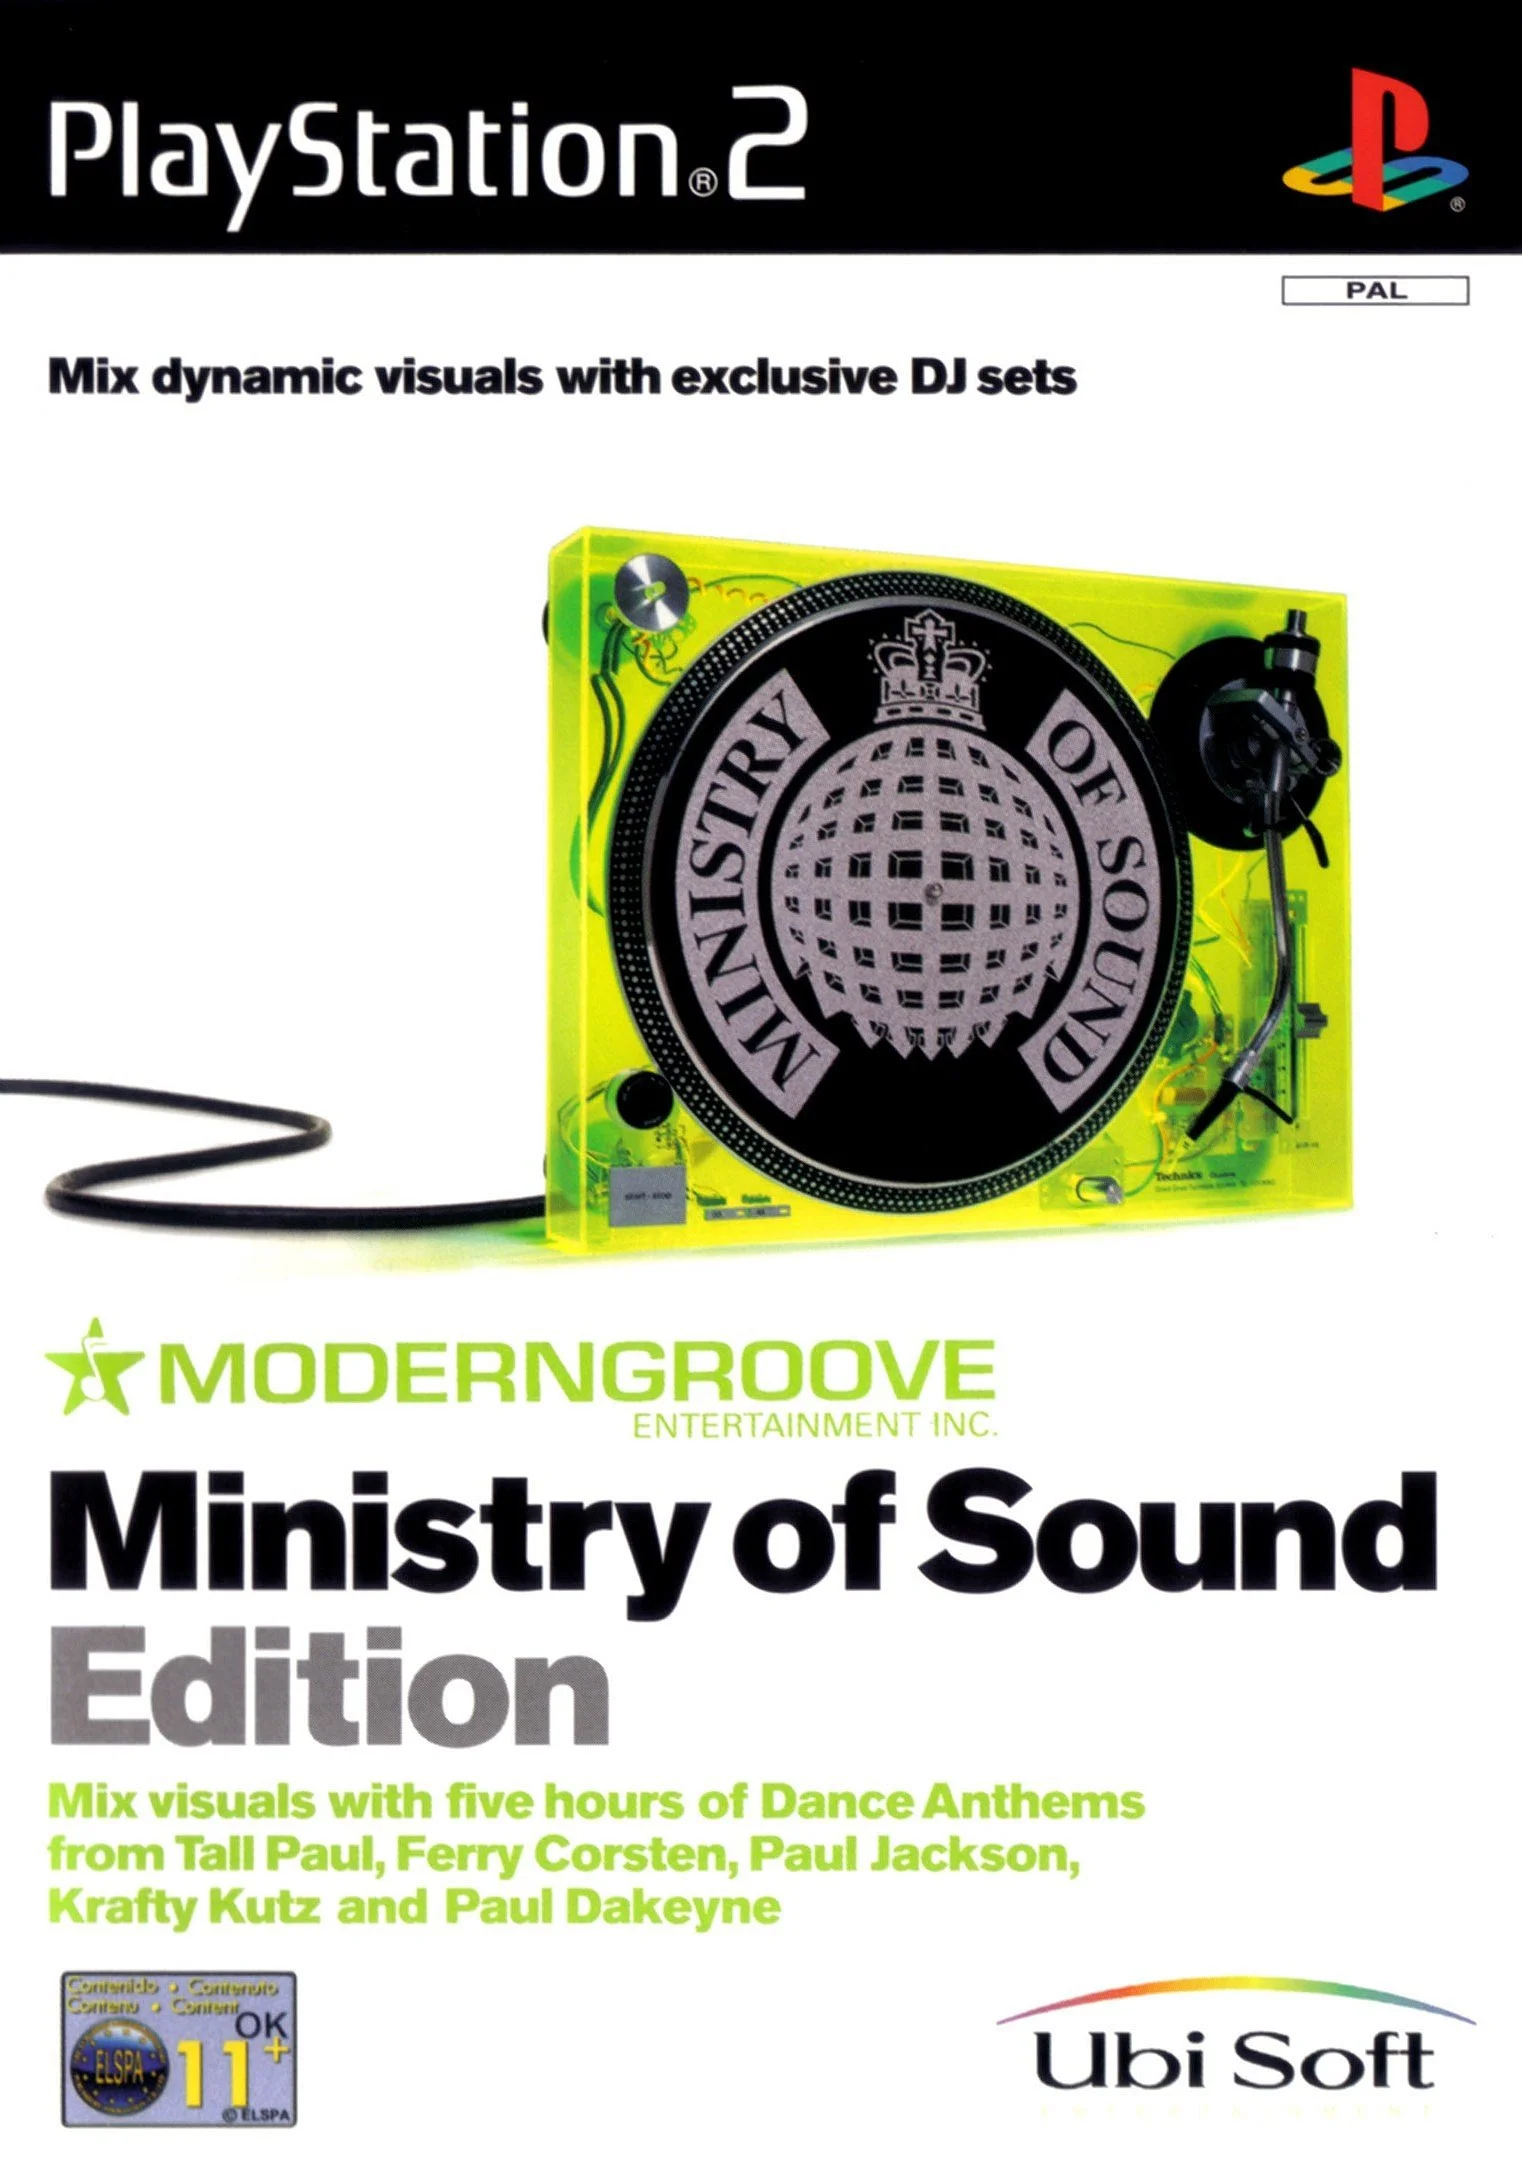 Moderngroove: Ministry of Sound Edition